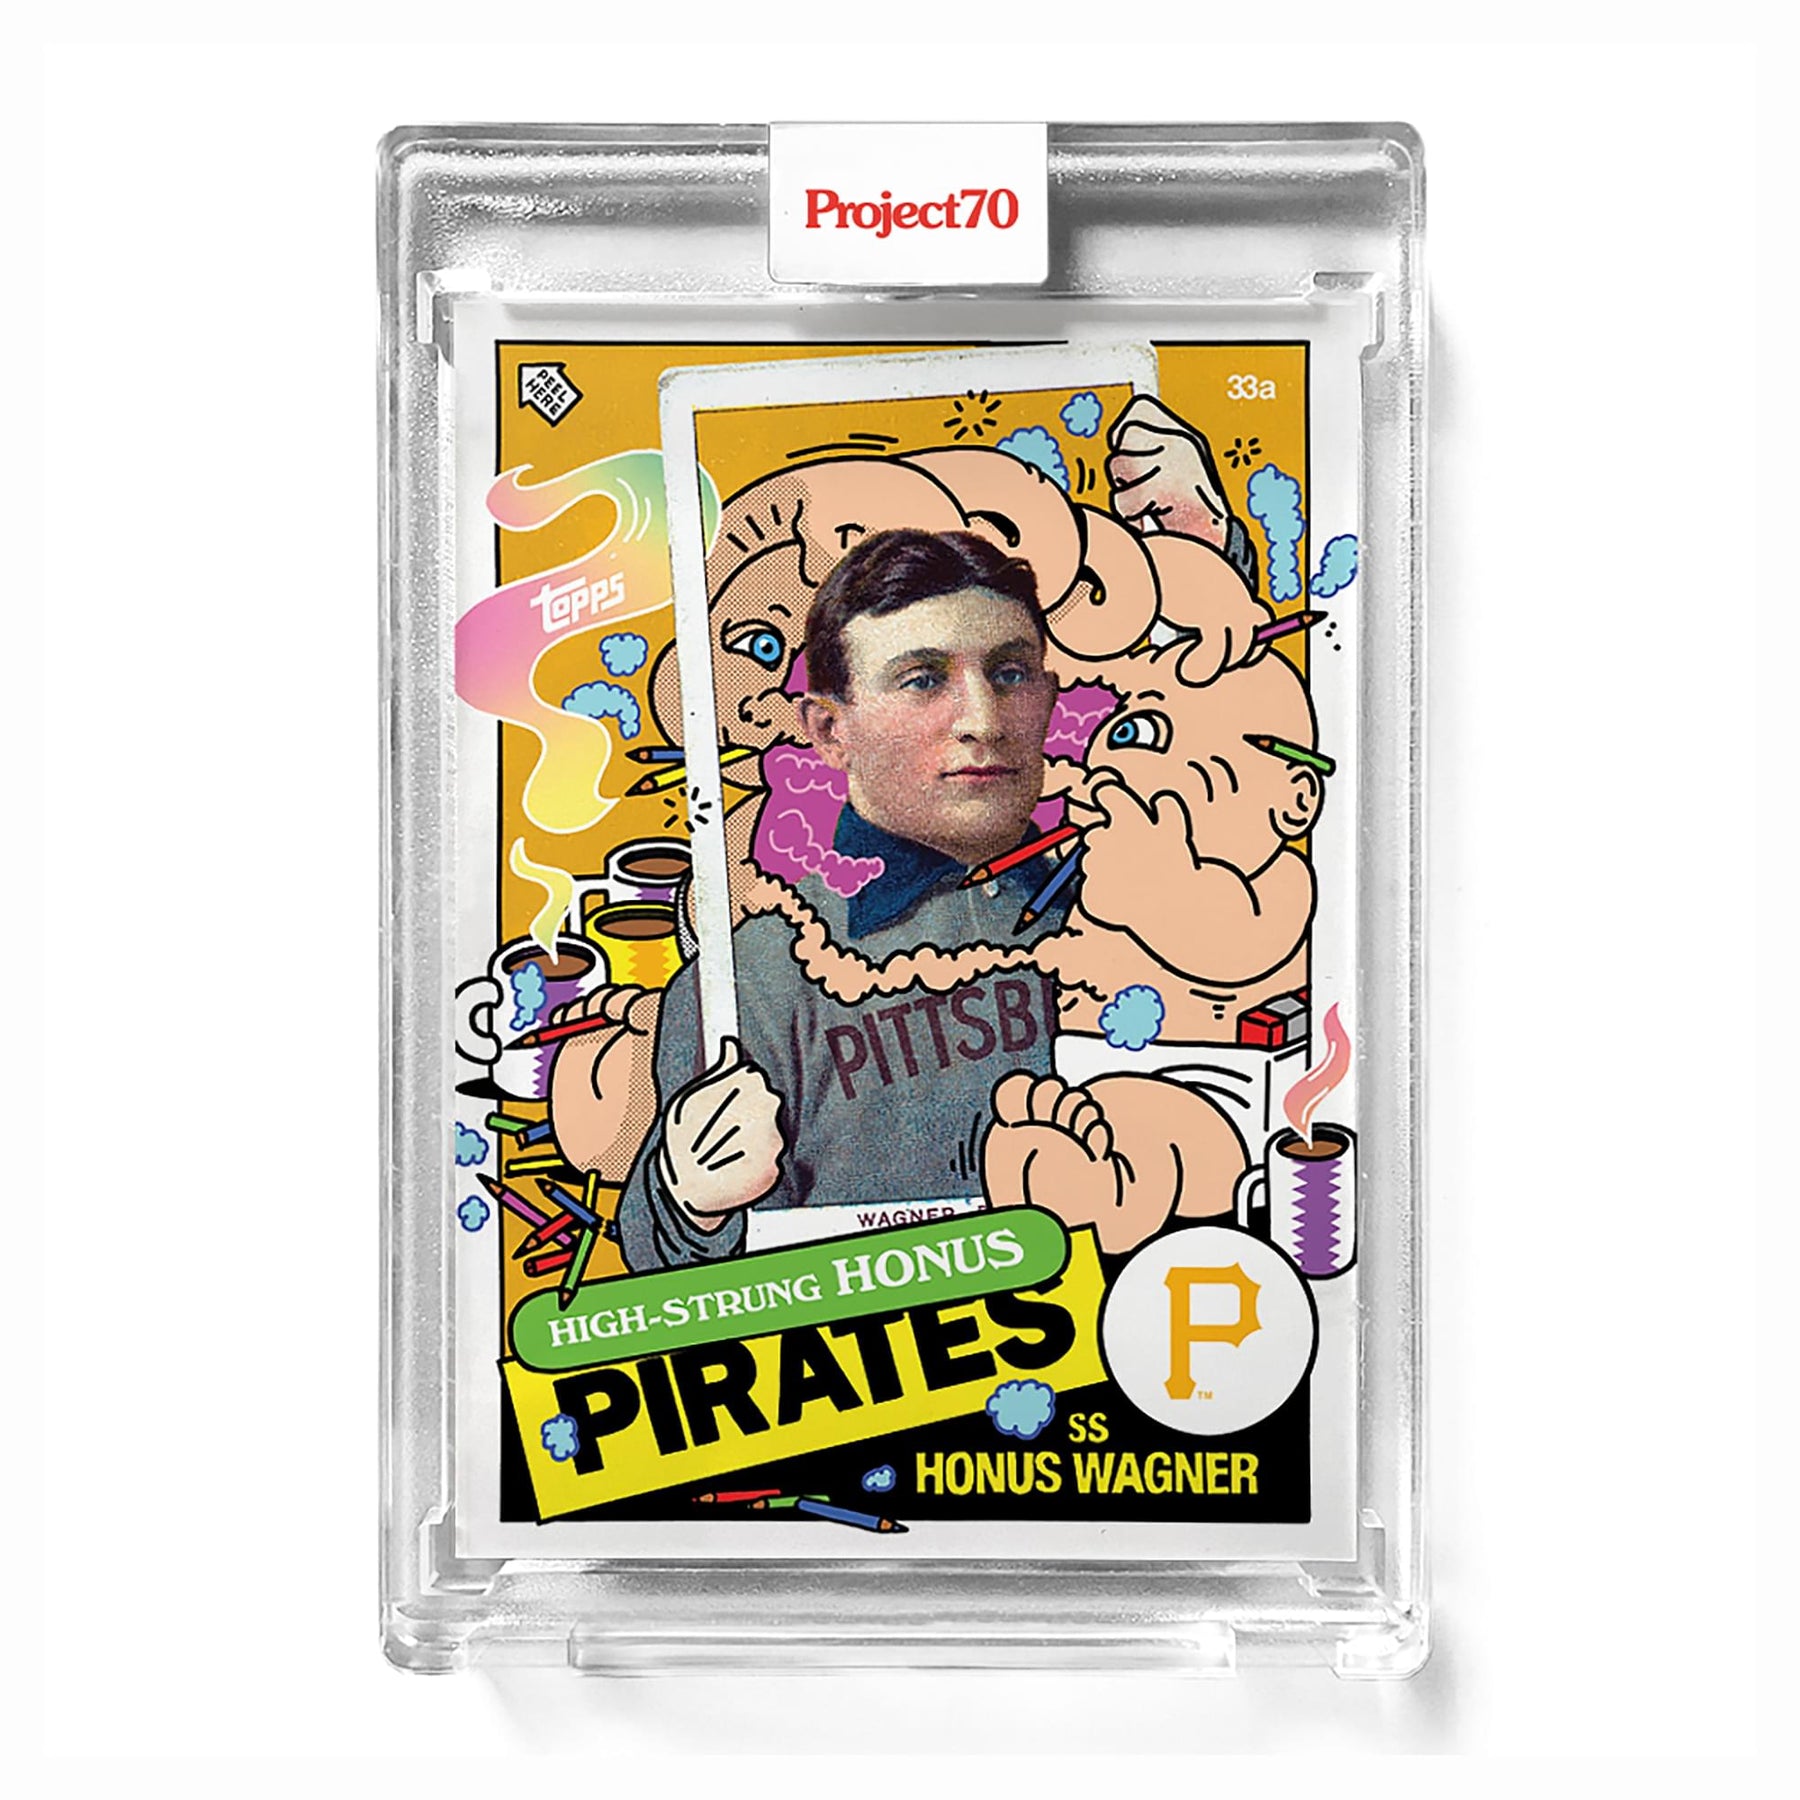 MLB Topps Project70 Card 827 | Honus Wagner by Ermsy